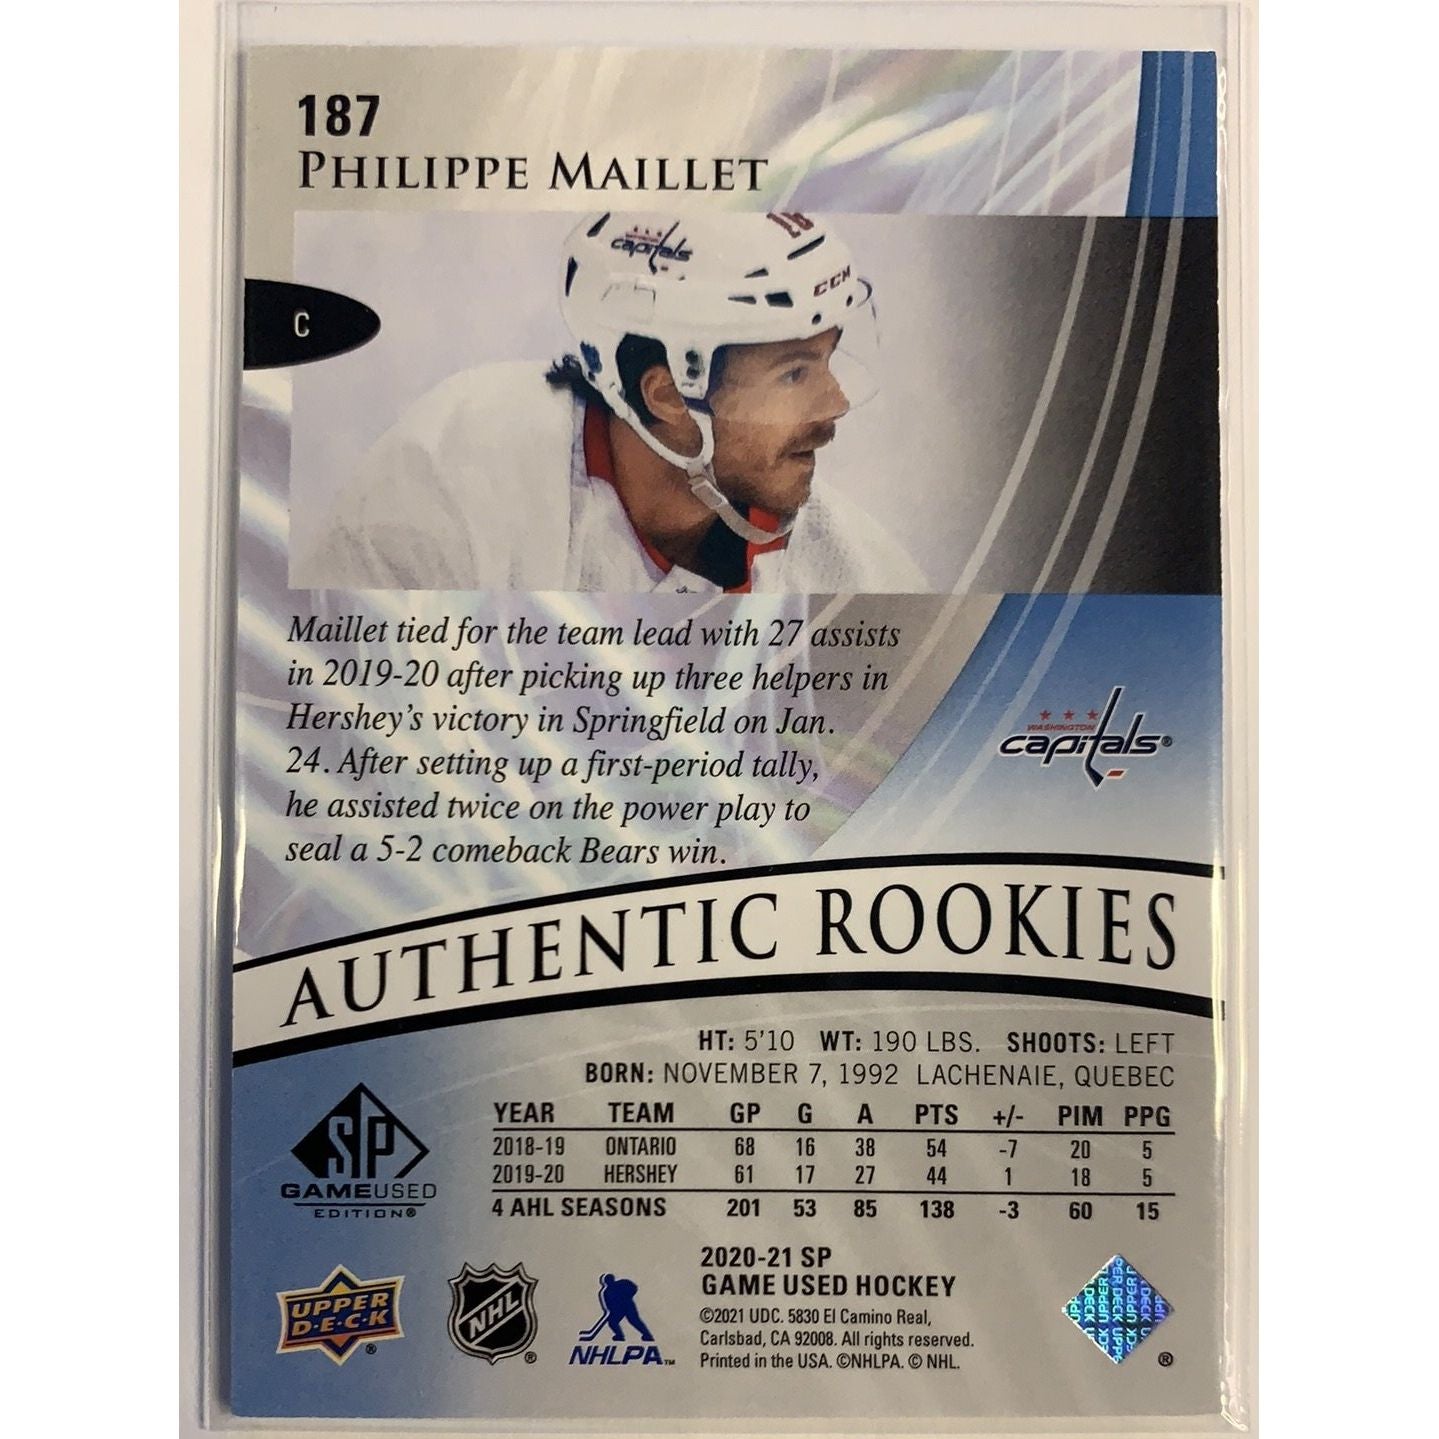  2020-21 SP Game Used Phillipe Maillet Authentic Rookies Blue Burst /199  Local Legends Cards & Collectibles